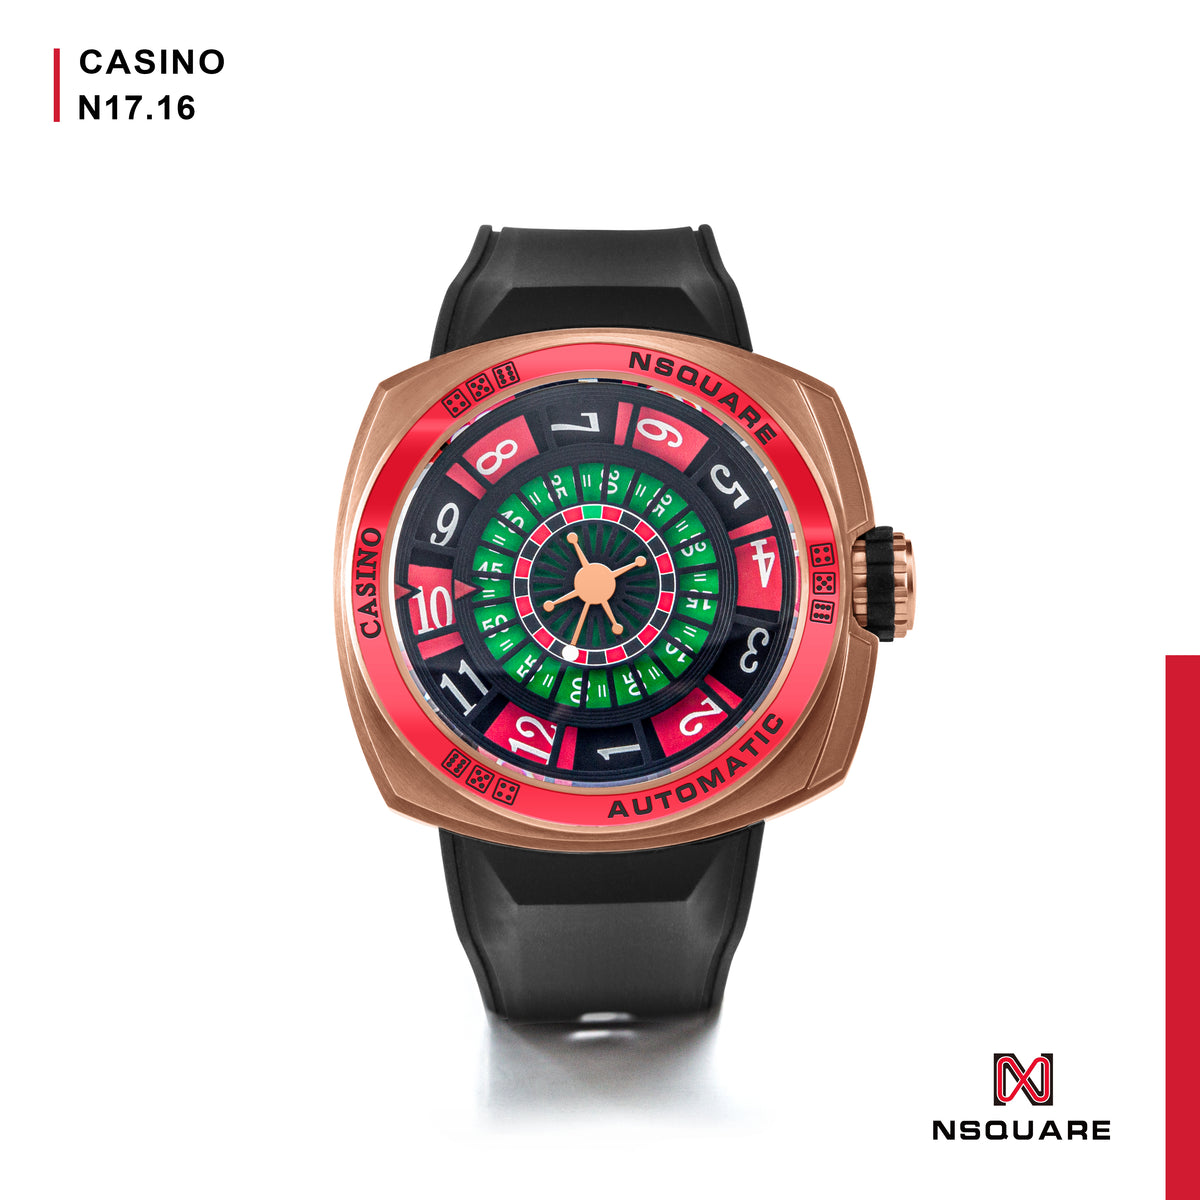 NSQUARE CASINO Automatic Watch 51mm-N17.16 Black/RG Limited Edition 88 –  NSquare Watch